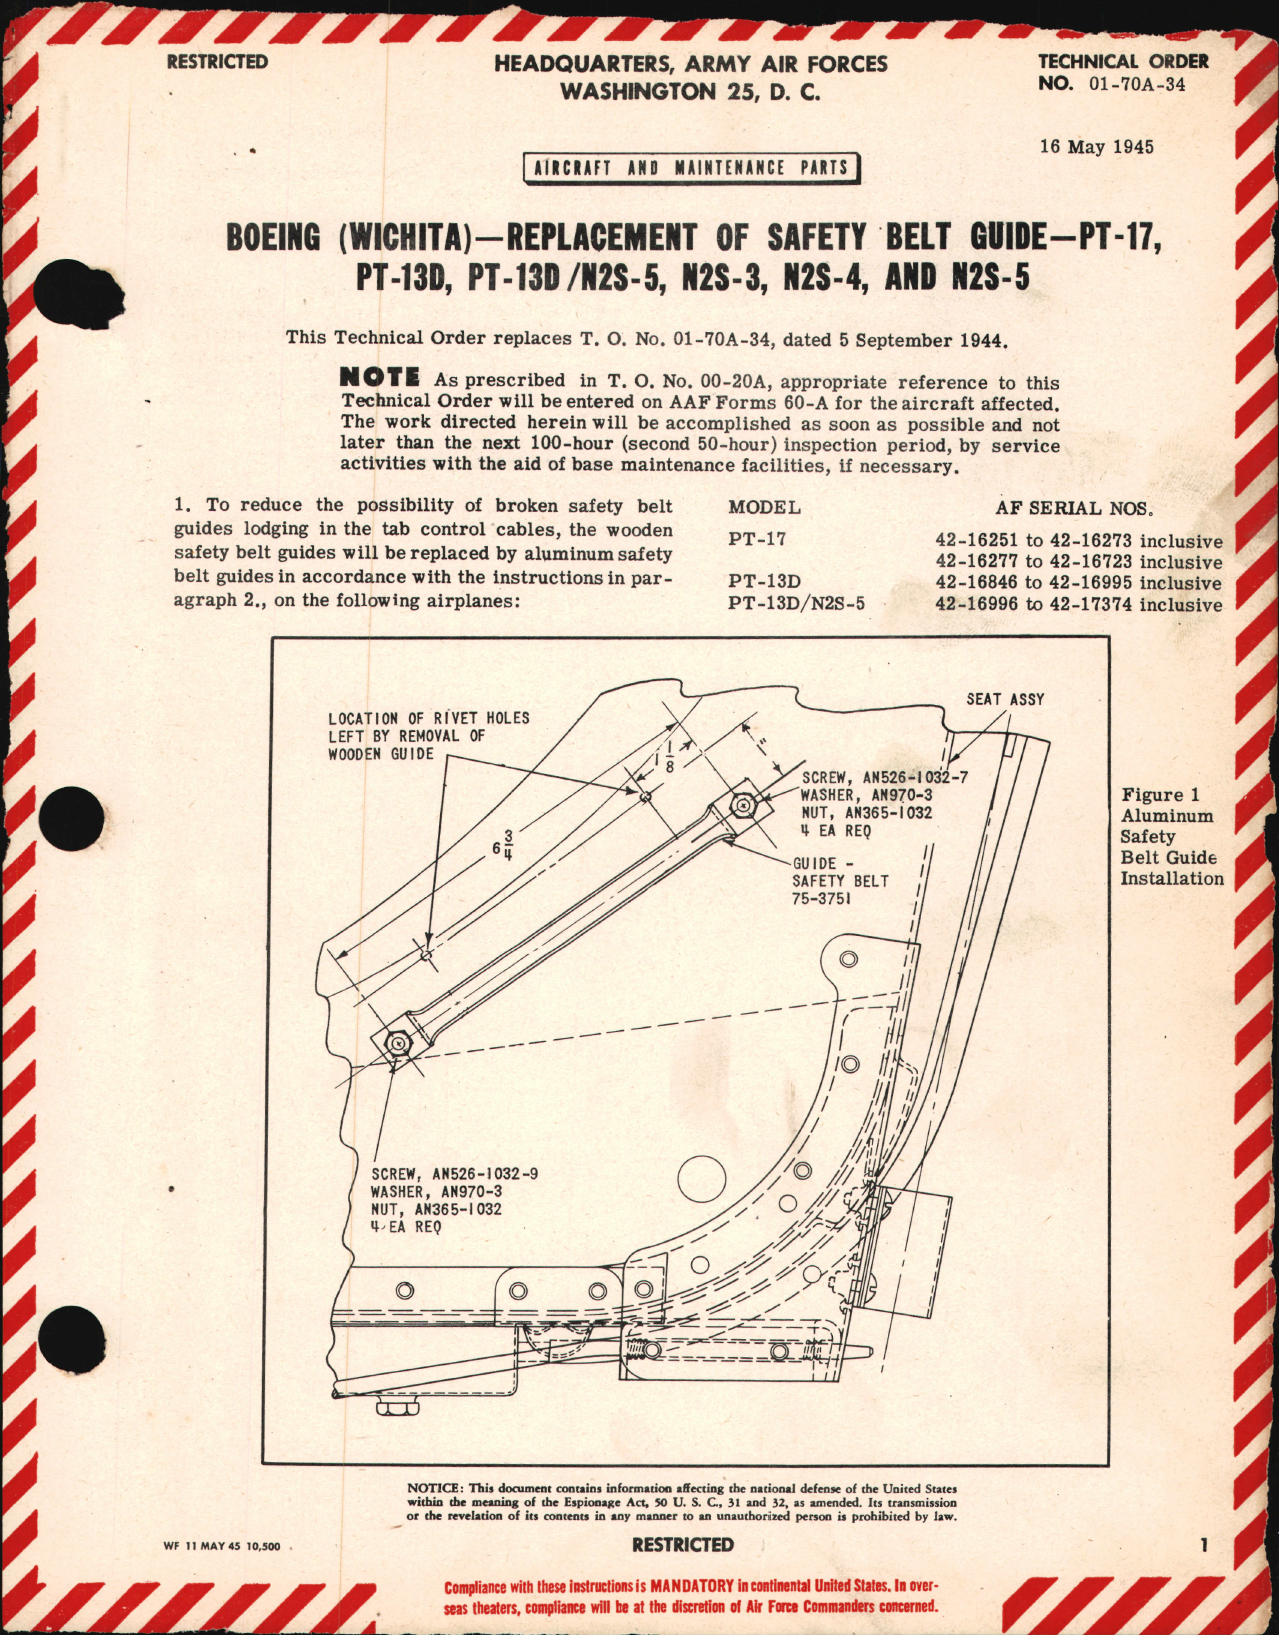 Sample page 1 from AirCorps Library document: Replacement of Safety Belt Guide for PT-17, -13D, N2S-5, -3, -4 & -5